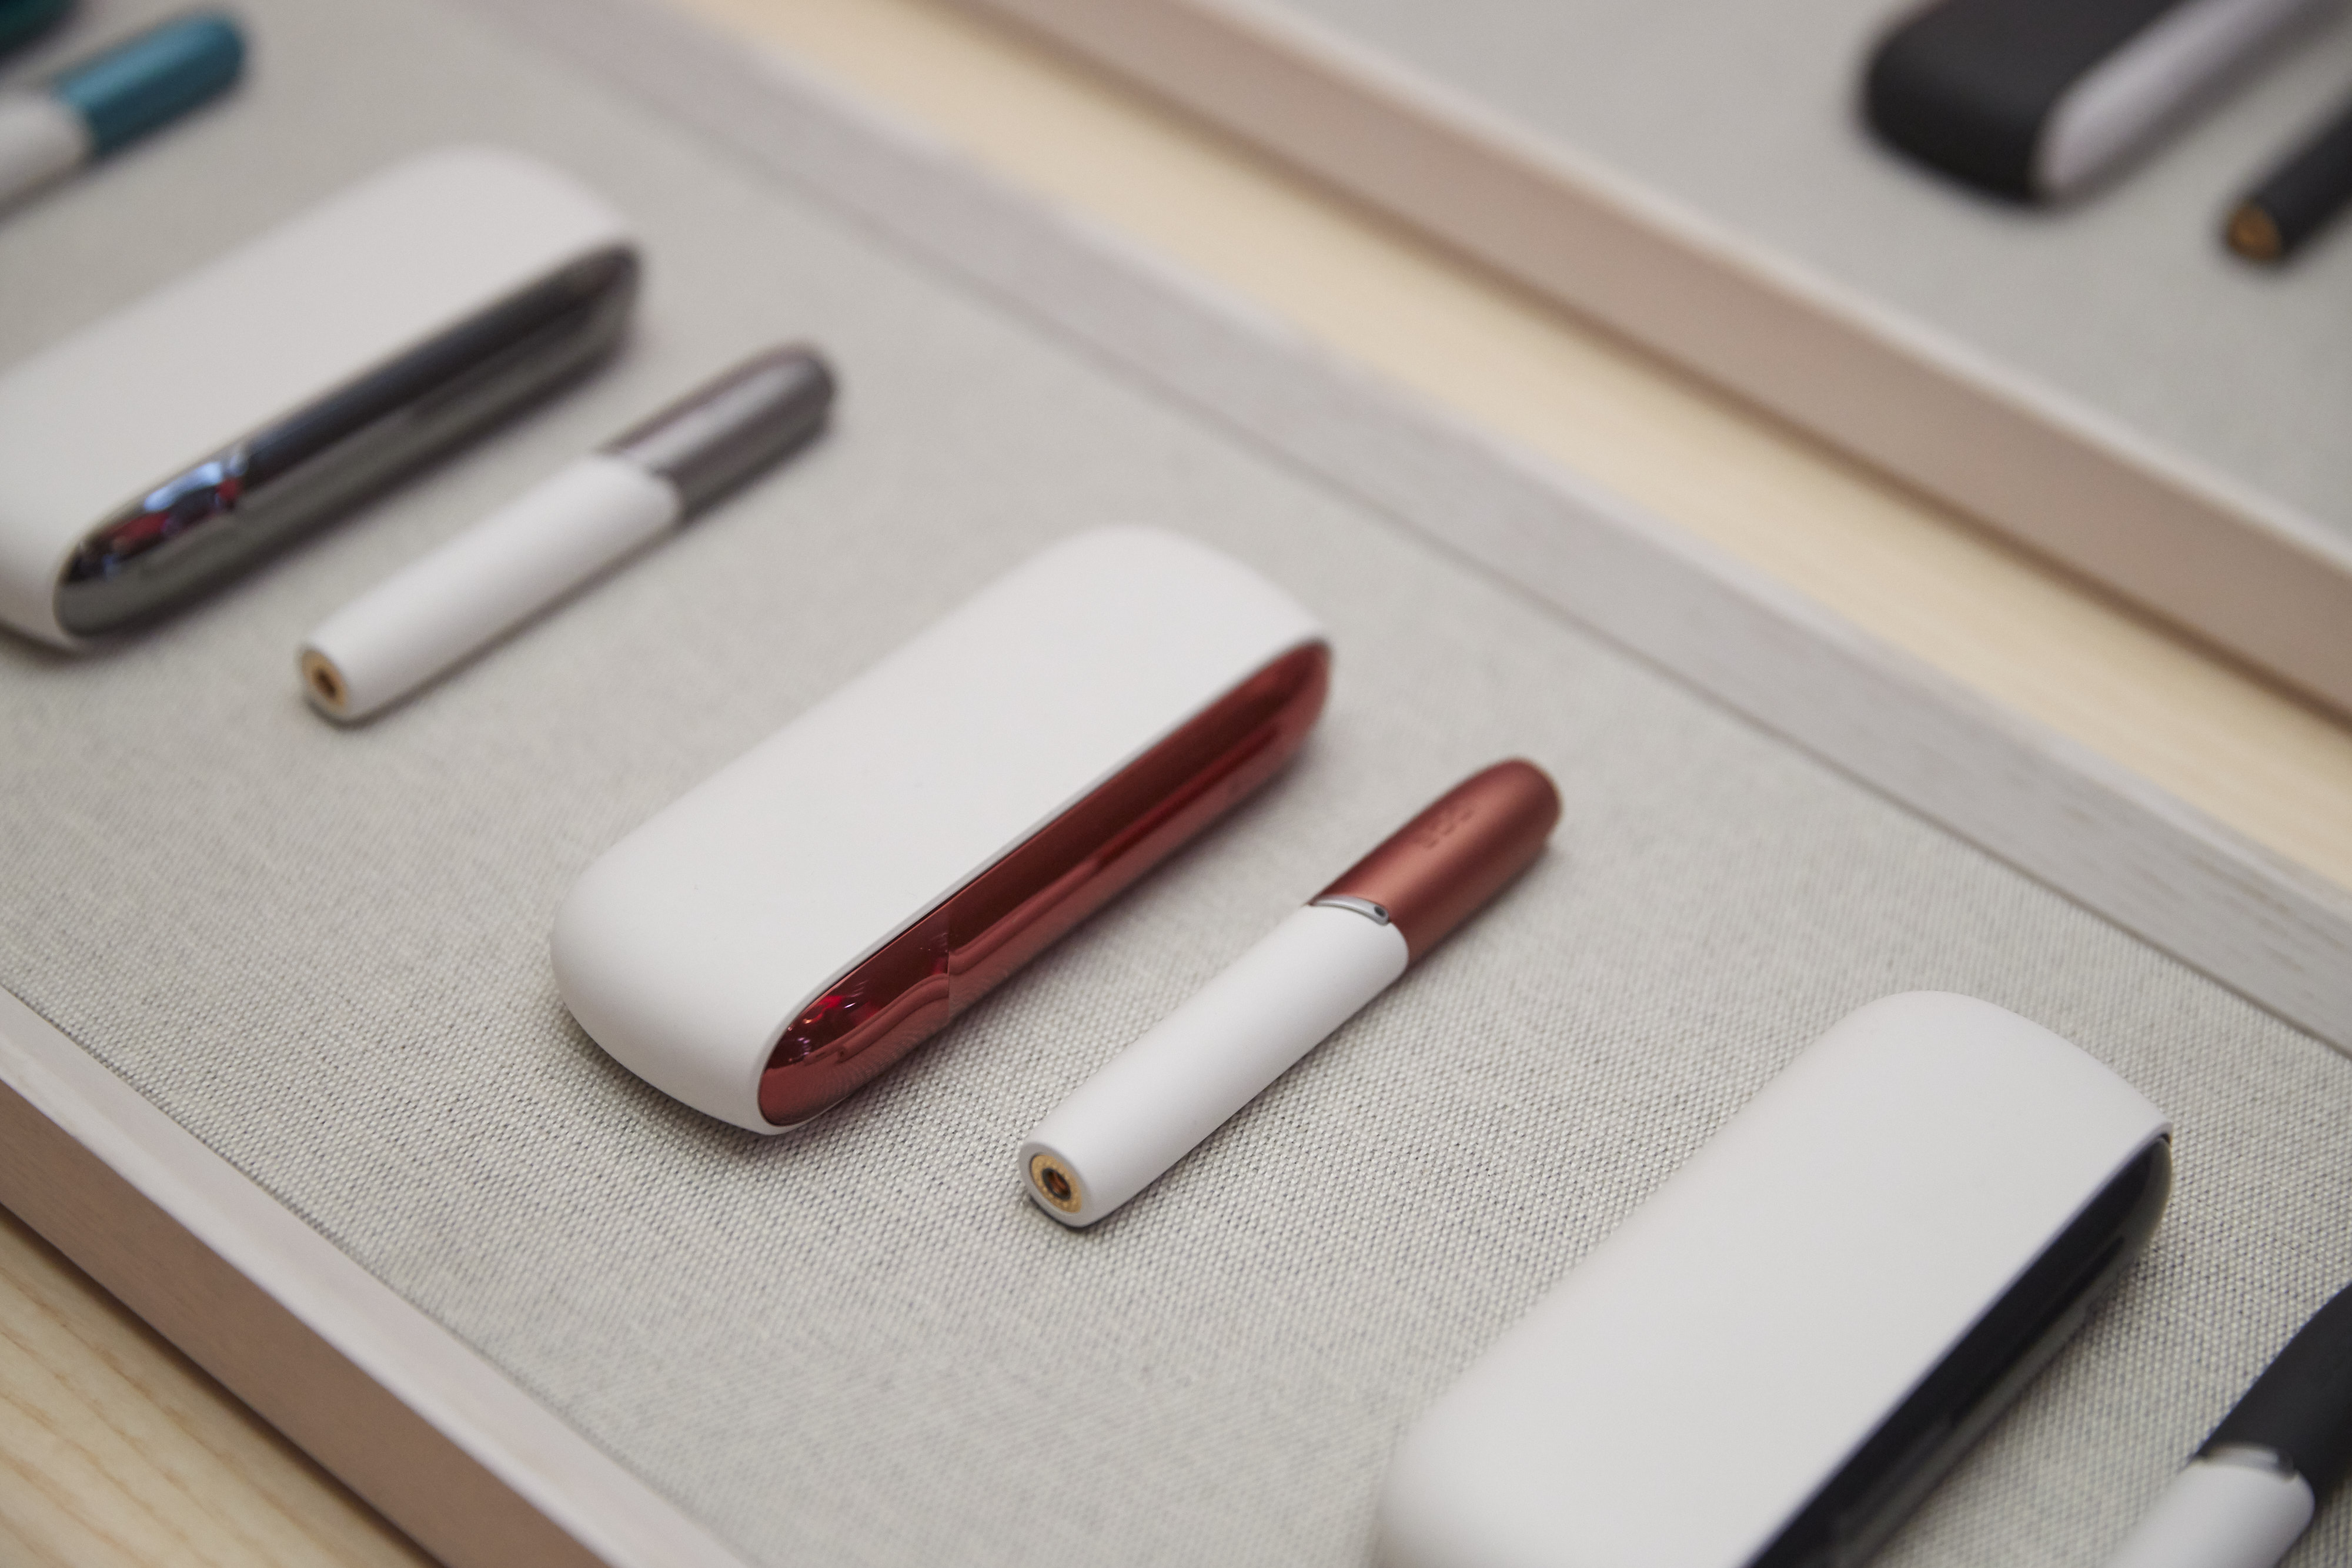 Philip Morris bets big on low-priced Iqos